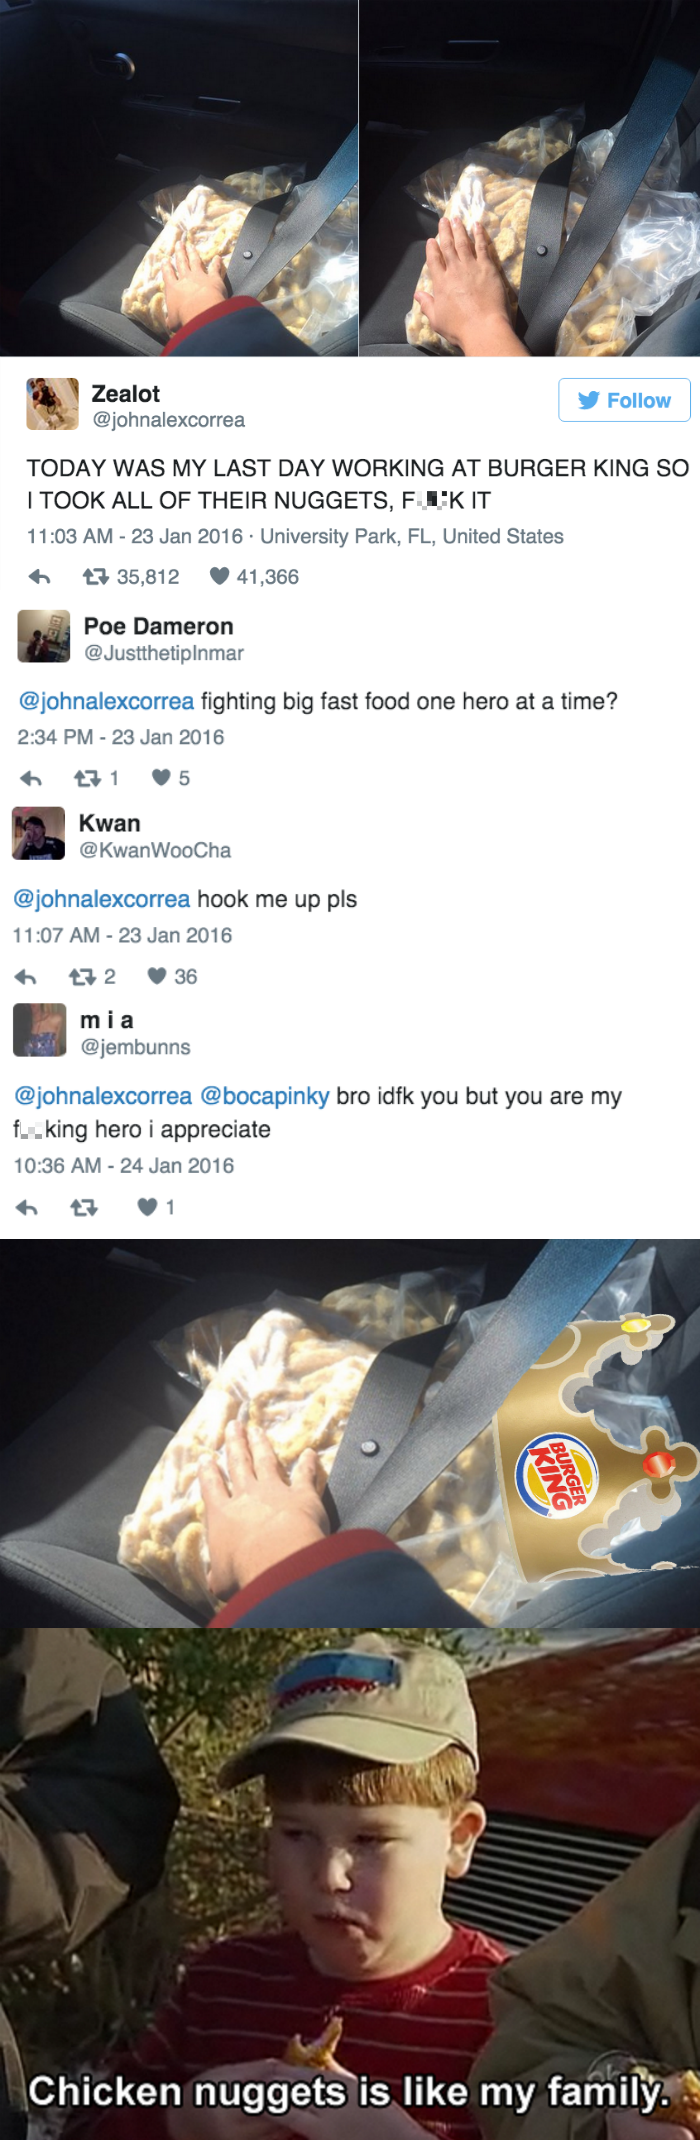 funny twitter image guy quits burger king job and steals all the nuggets